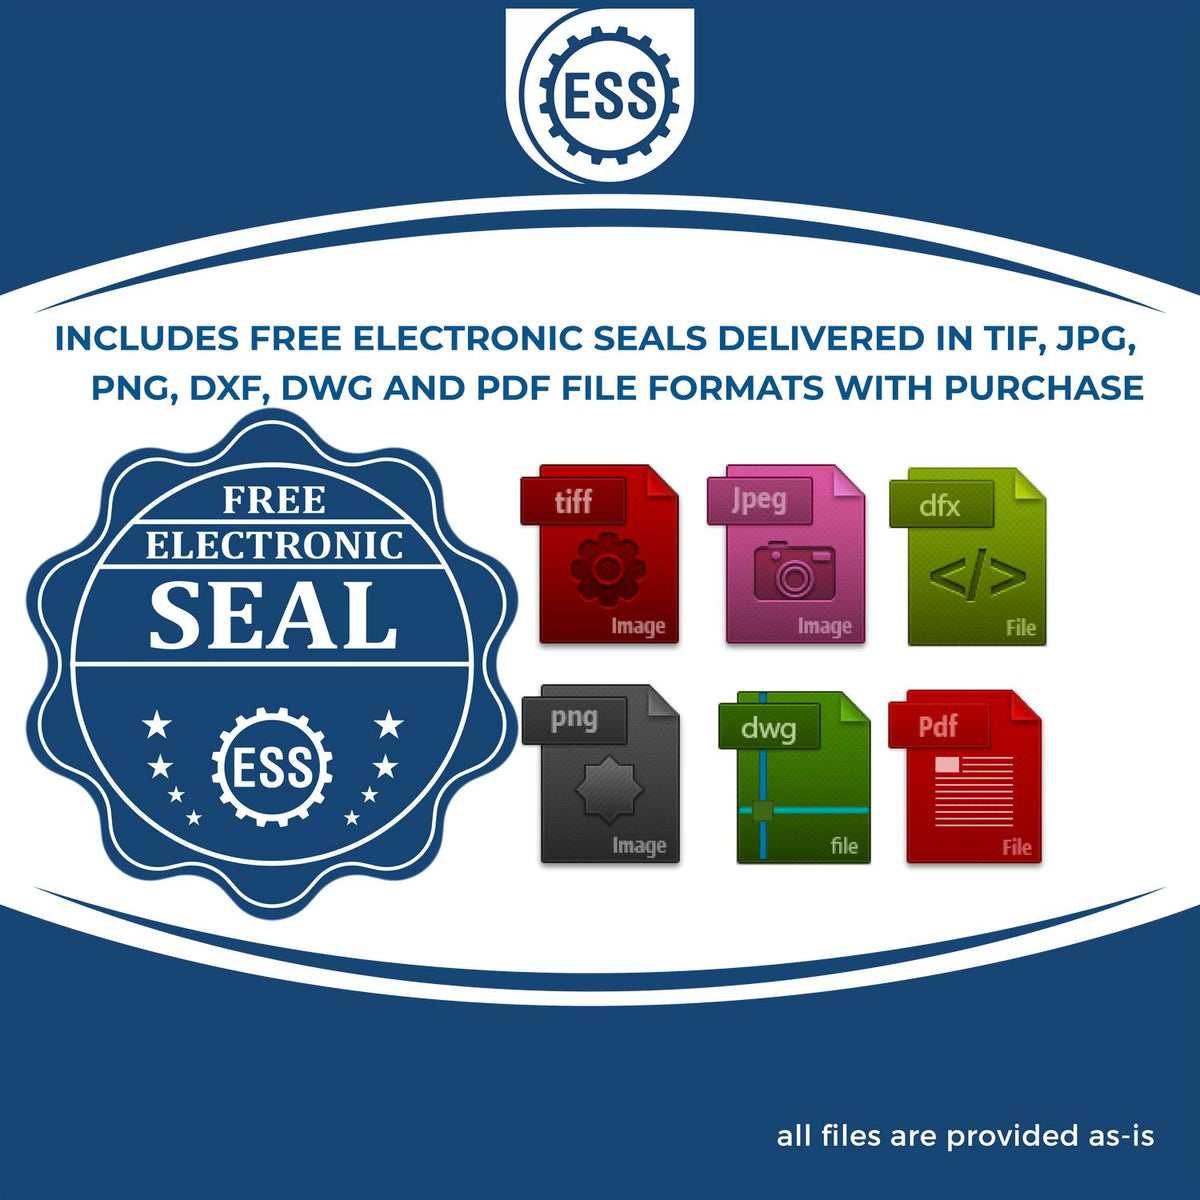 An infographic for the free electronic seal for the Wooden Handle Iowa State Seal Notary Public Stamp illustrating the different file type icons such as DXF, DWG, TIF, JPG and PNG.